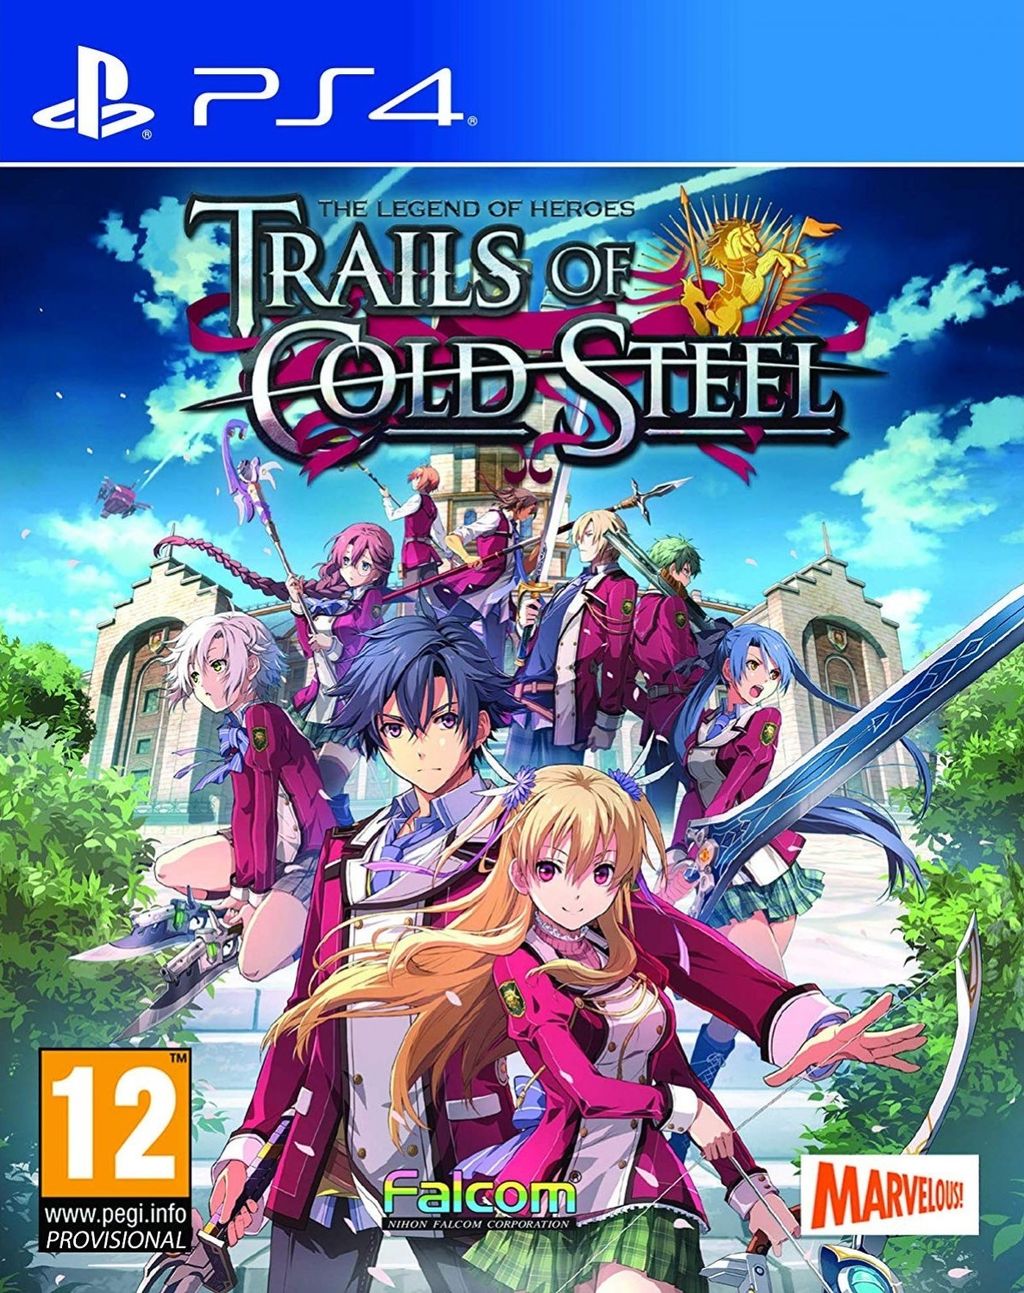 the-legend-of-heroes-trails-of-cold-steel-579153.1.jpg